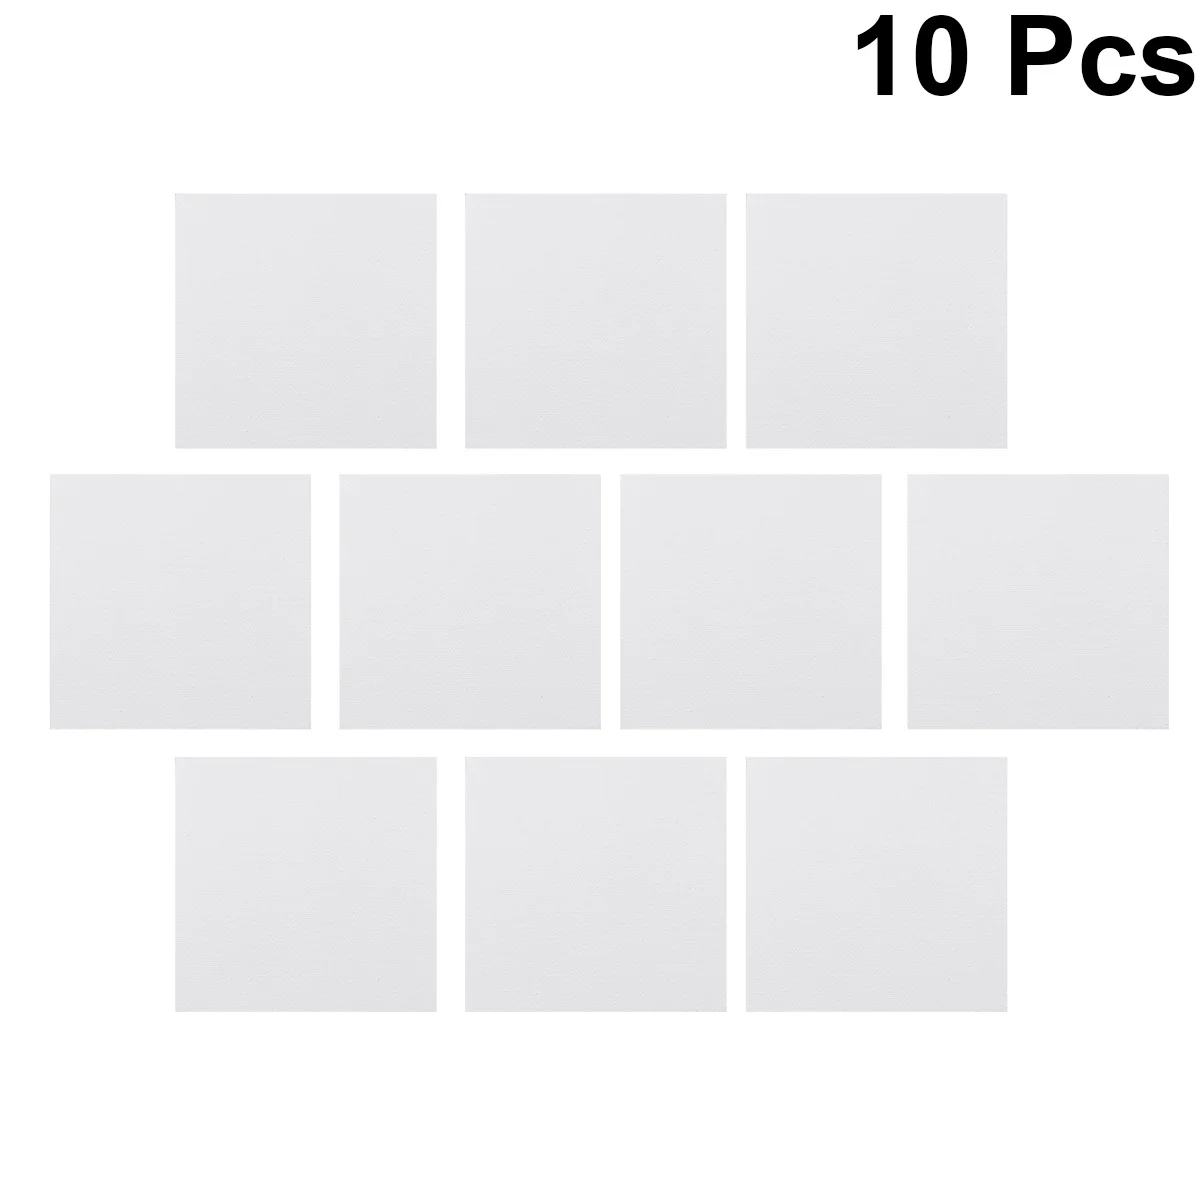 Canvas 10 Pack- 4 inch x 4 inch White Blank Canvas Panel Boards, 100% Cotton for Painting, Oil& Wet Media, Canvases for